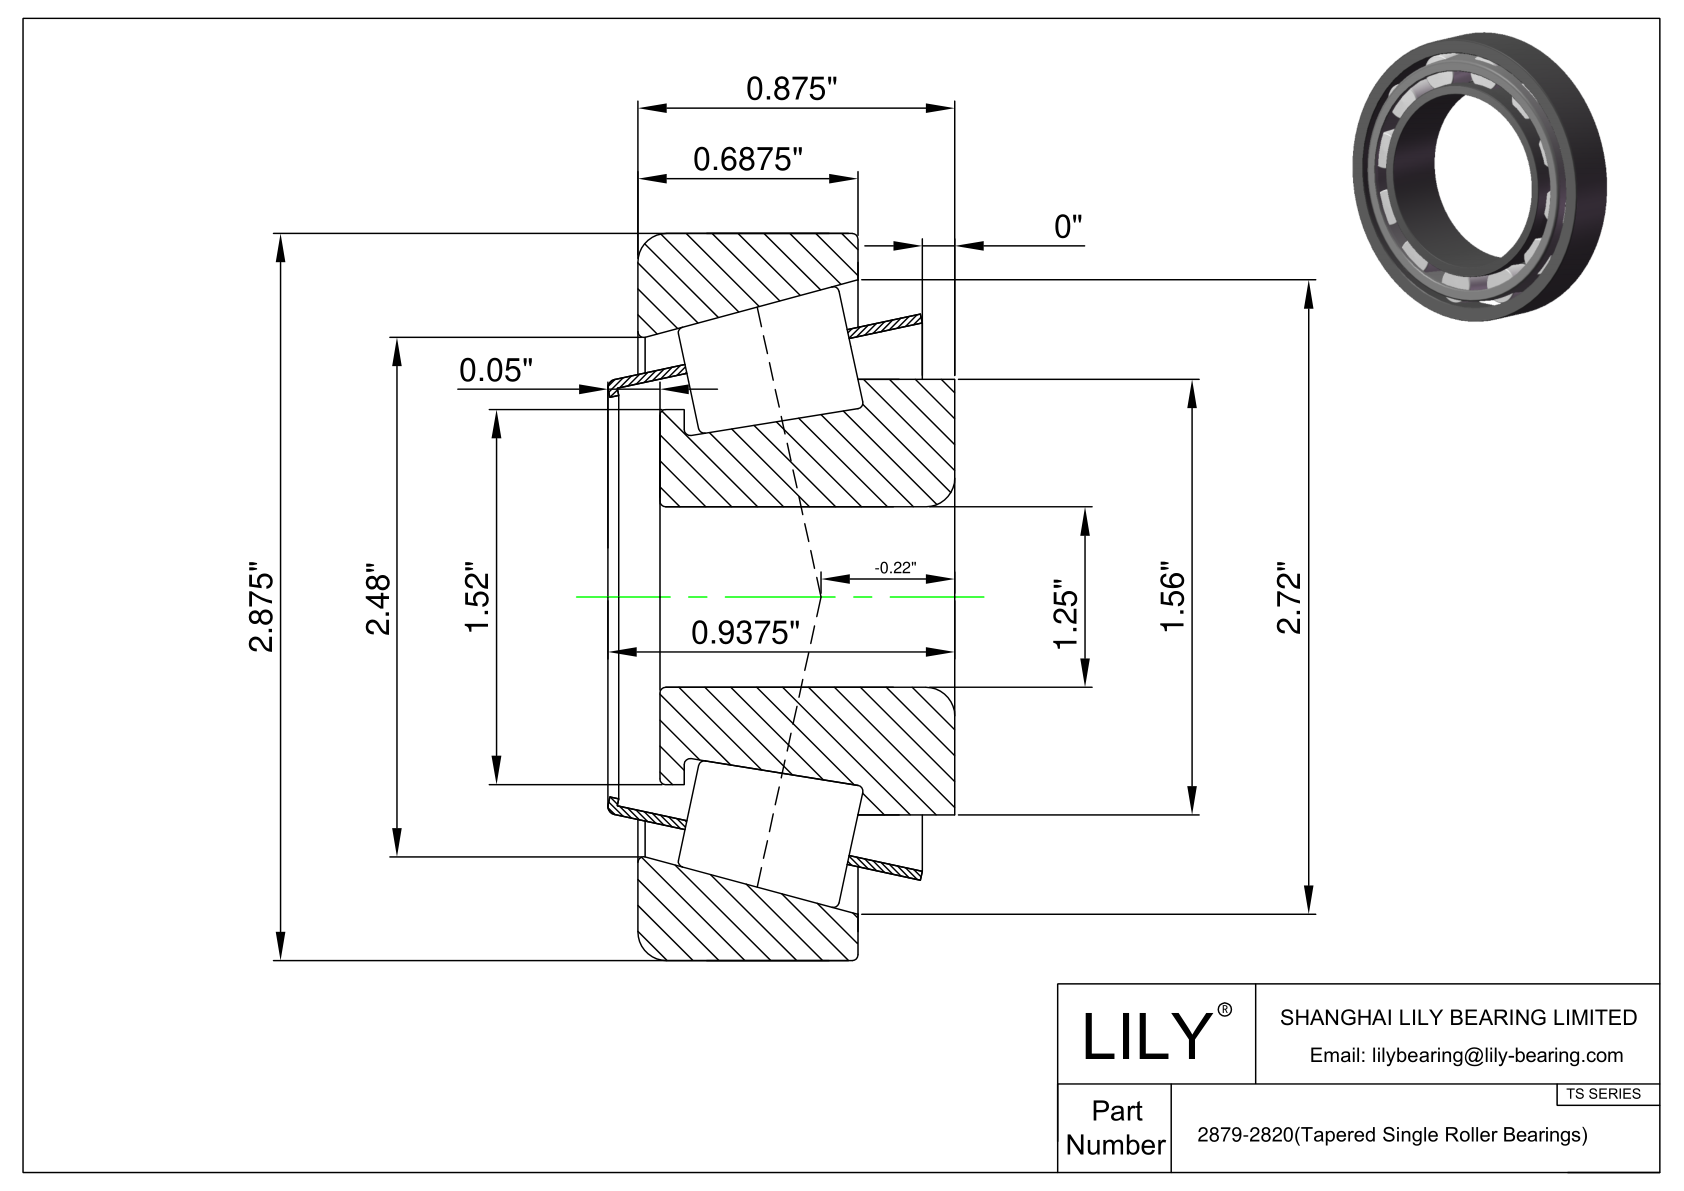 2879-2820 TS (Tapered Single Roller Bearings) (Imperial) cad drawing